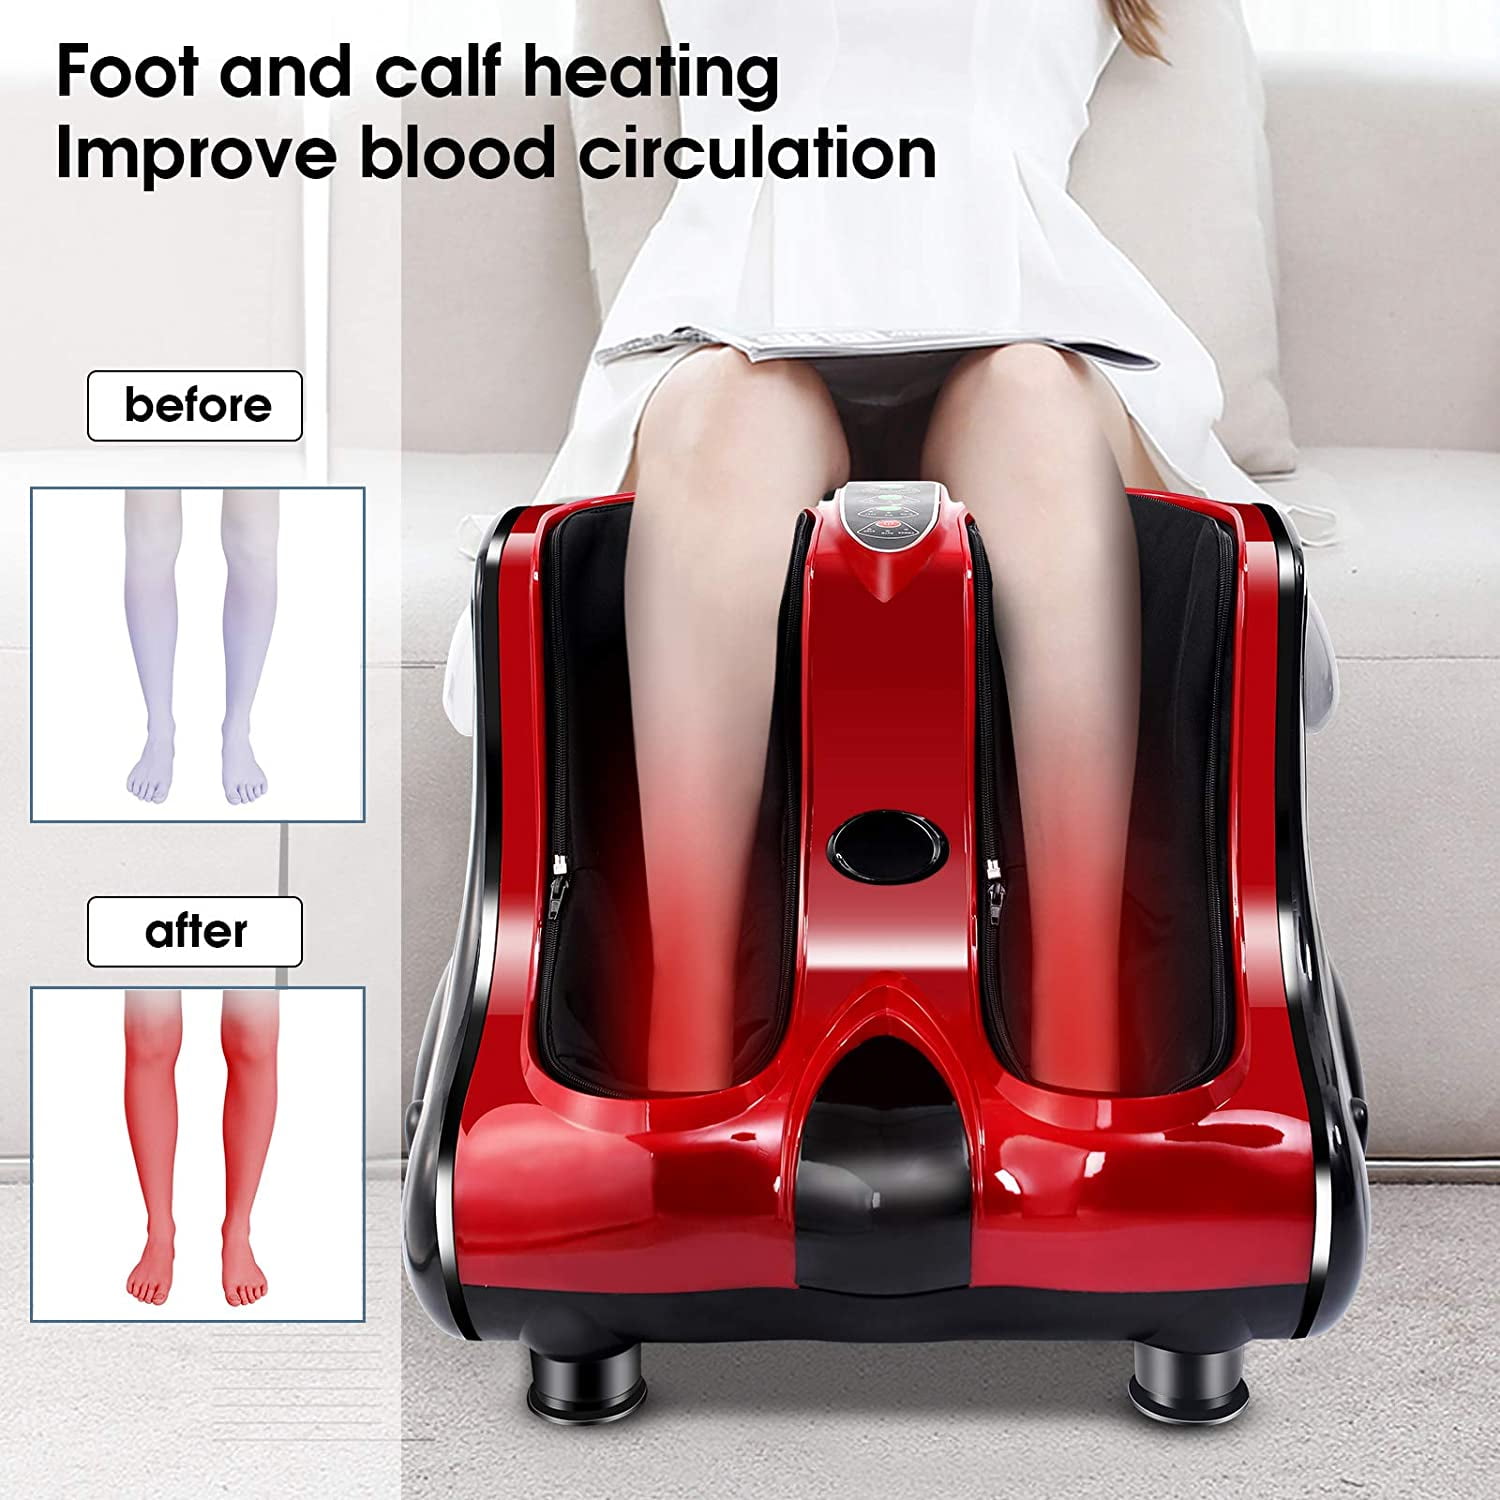 Barton #5 Speed Setting Shiatsu Kneading Rolling Foot Forearm Leg and Calf Massager w/Heating and Remote, Pink